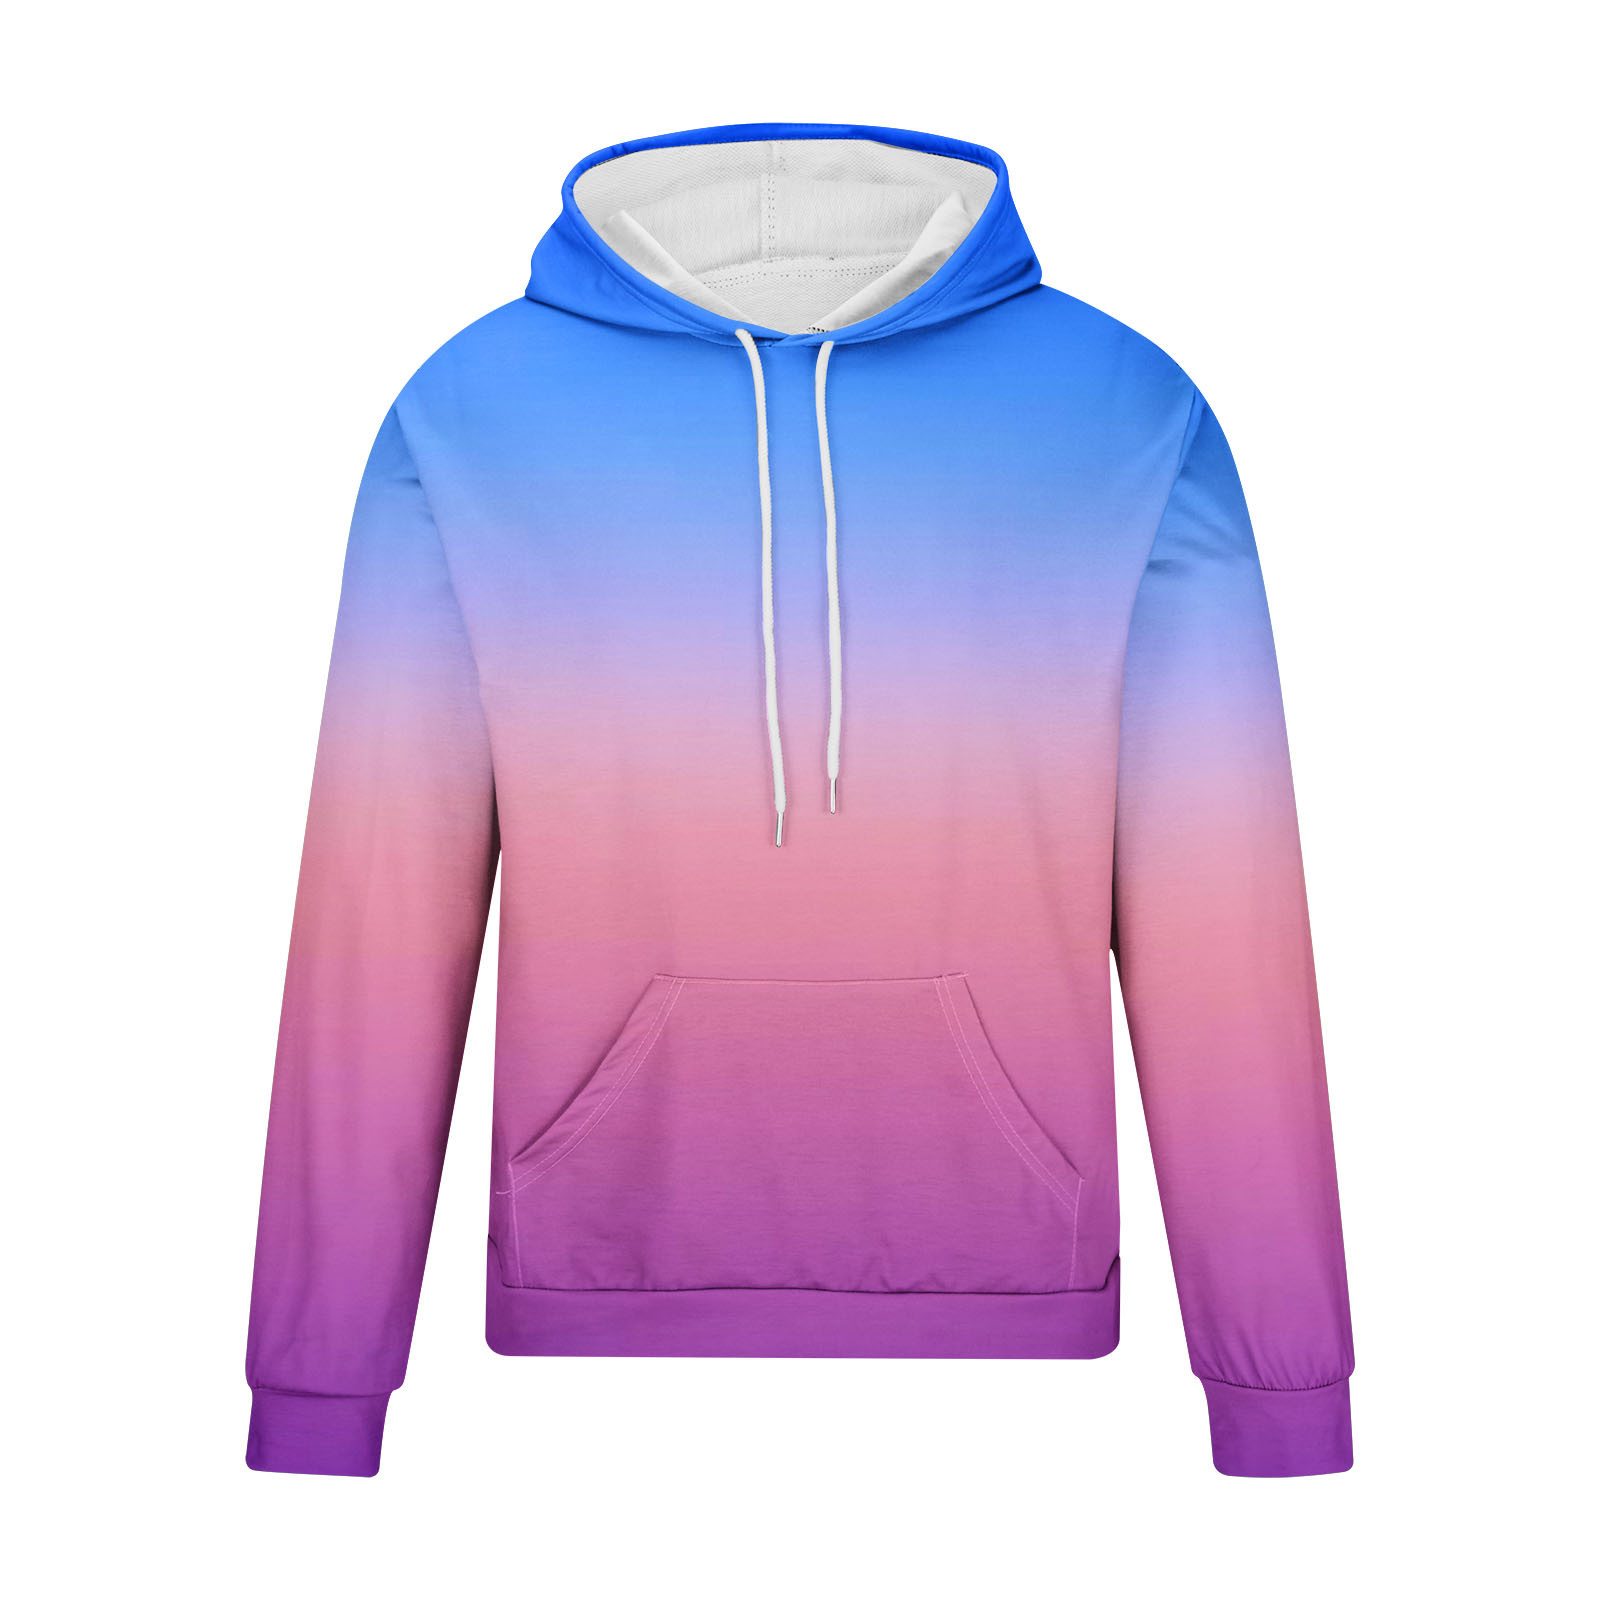 Bilqis Mens Tie-Dye Pullover Hooded Sweatshirt on Clearance,Big and ...